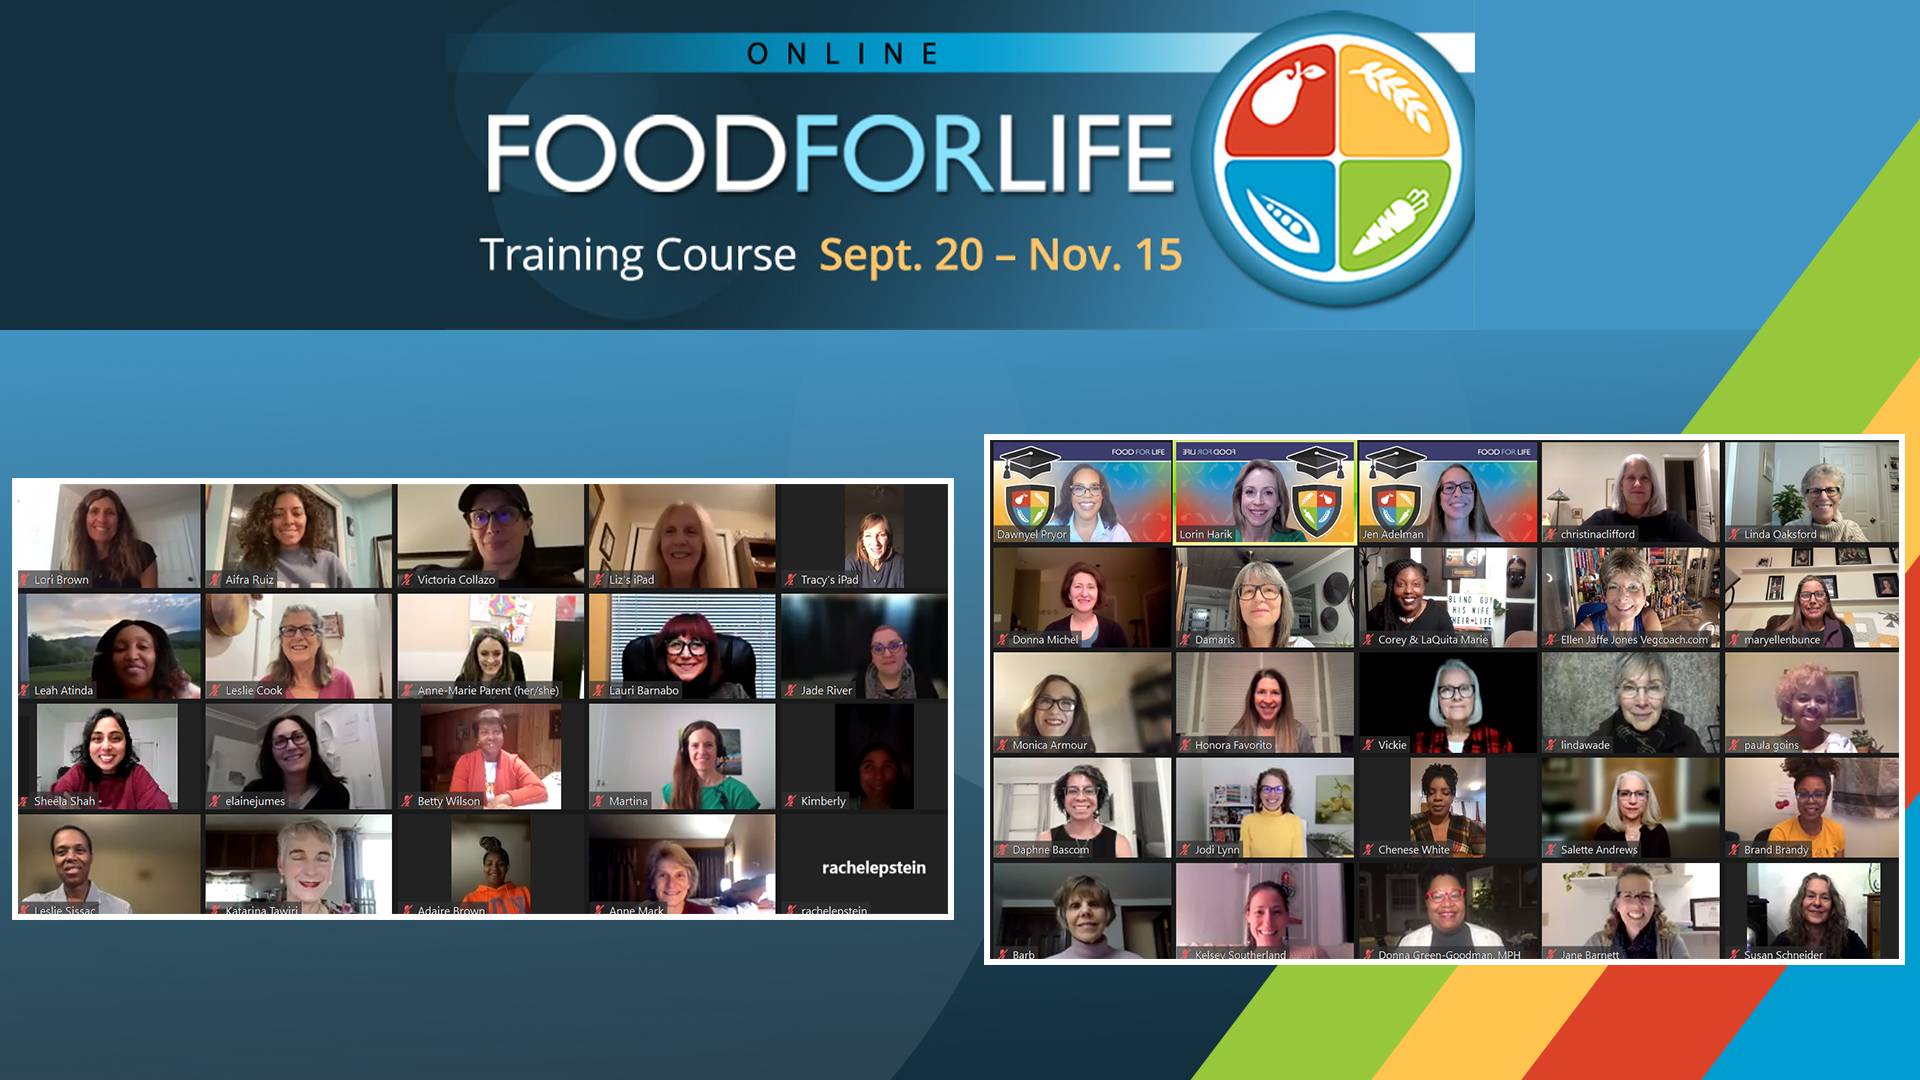 68 New Food for Life Plant-Based Nutrition Instructors From Across the Globe